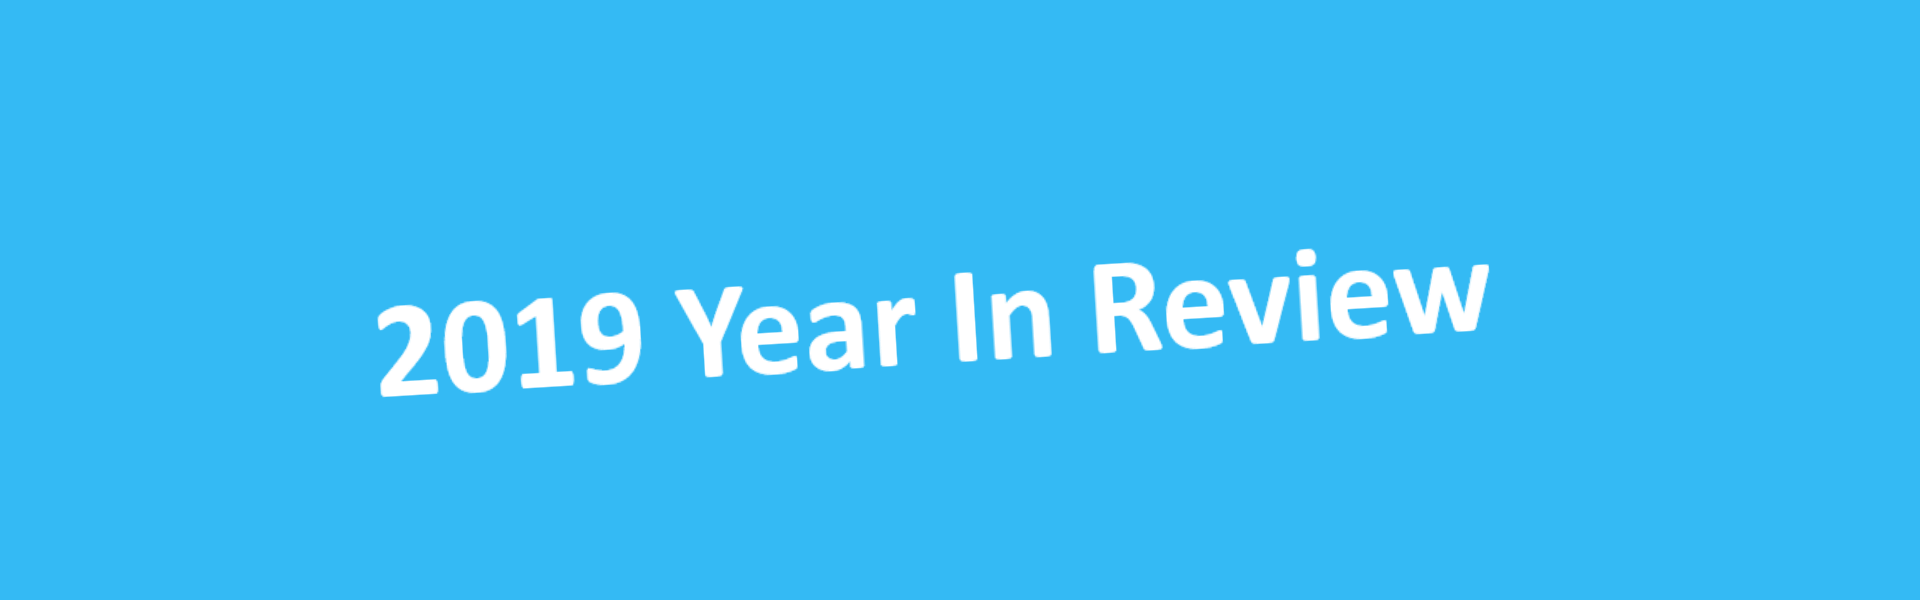 Year In Review Graphic